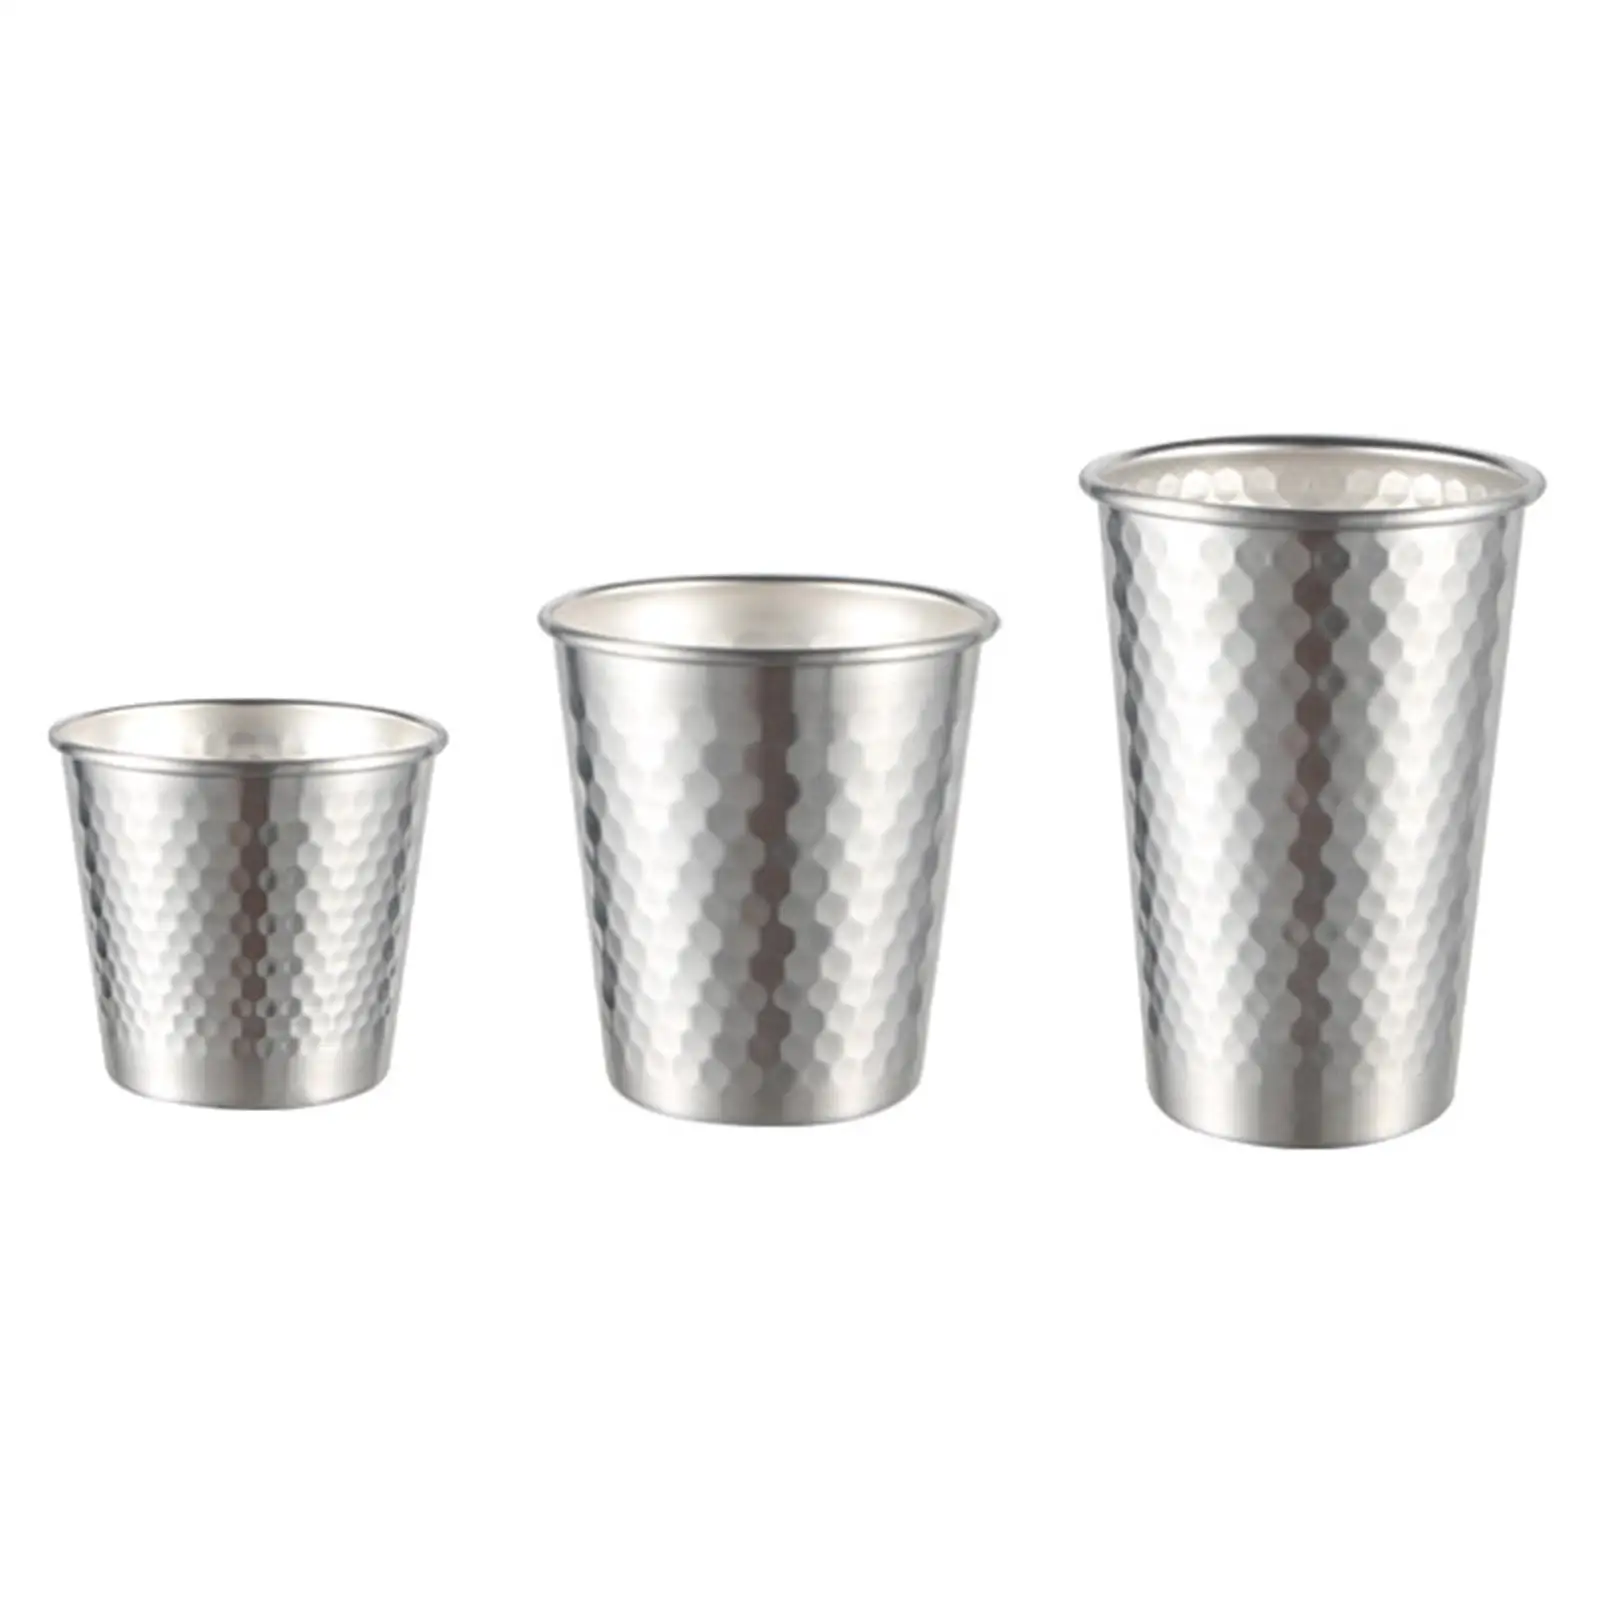 Liquor Cup Portable Double Wall Water Cup Mug 304Stainless Steel Tea Drink Cup Beer Cup for Camping Outdoor Party Cooking Wine